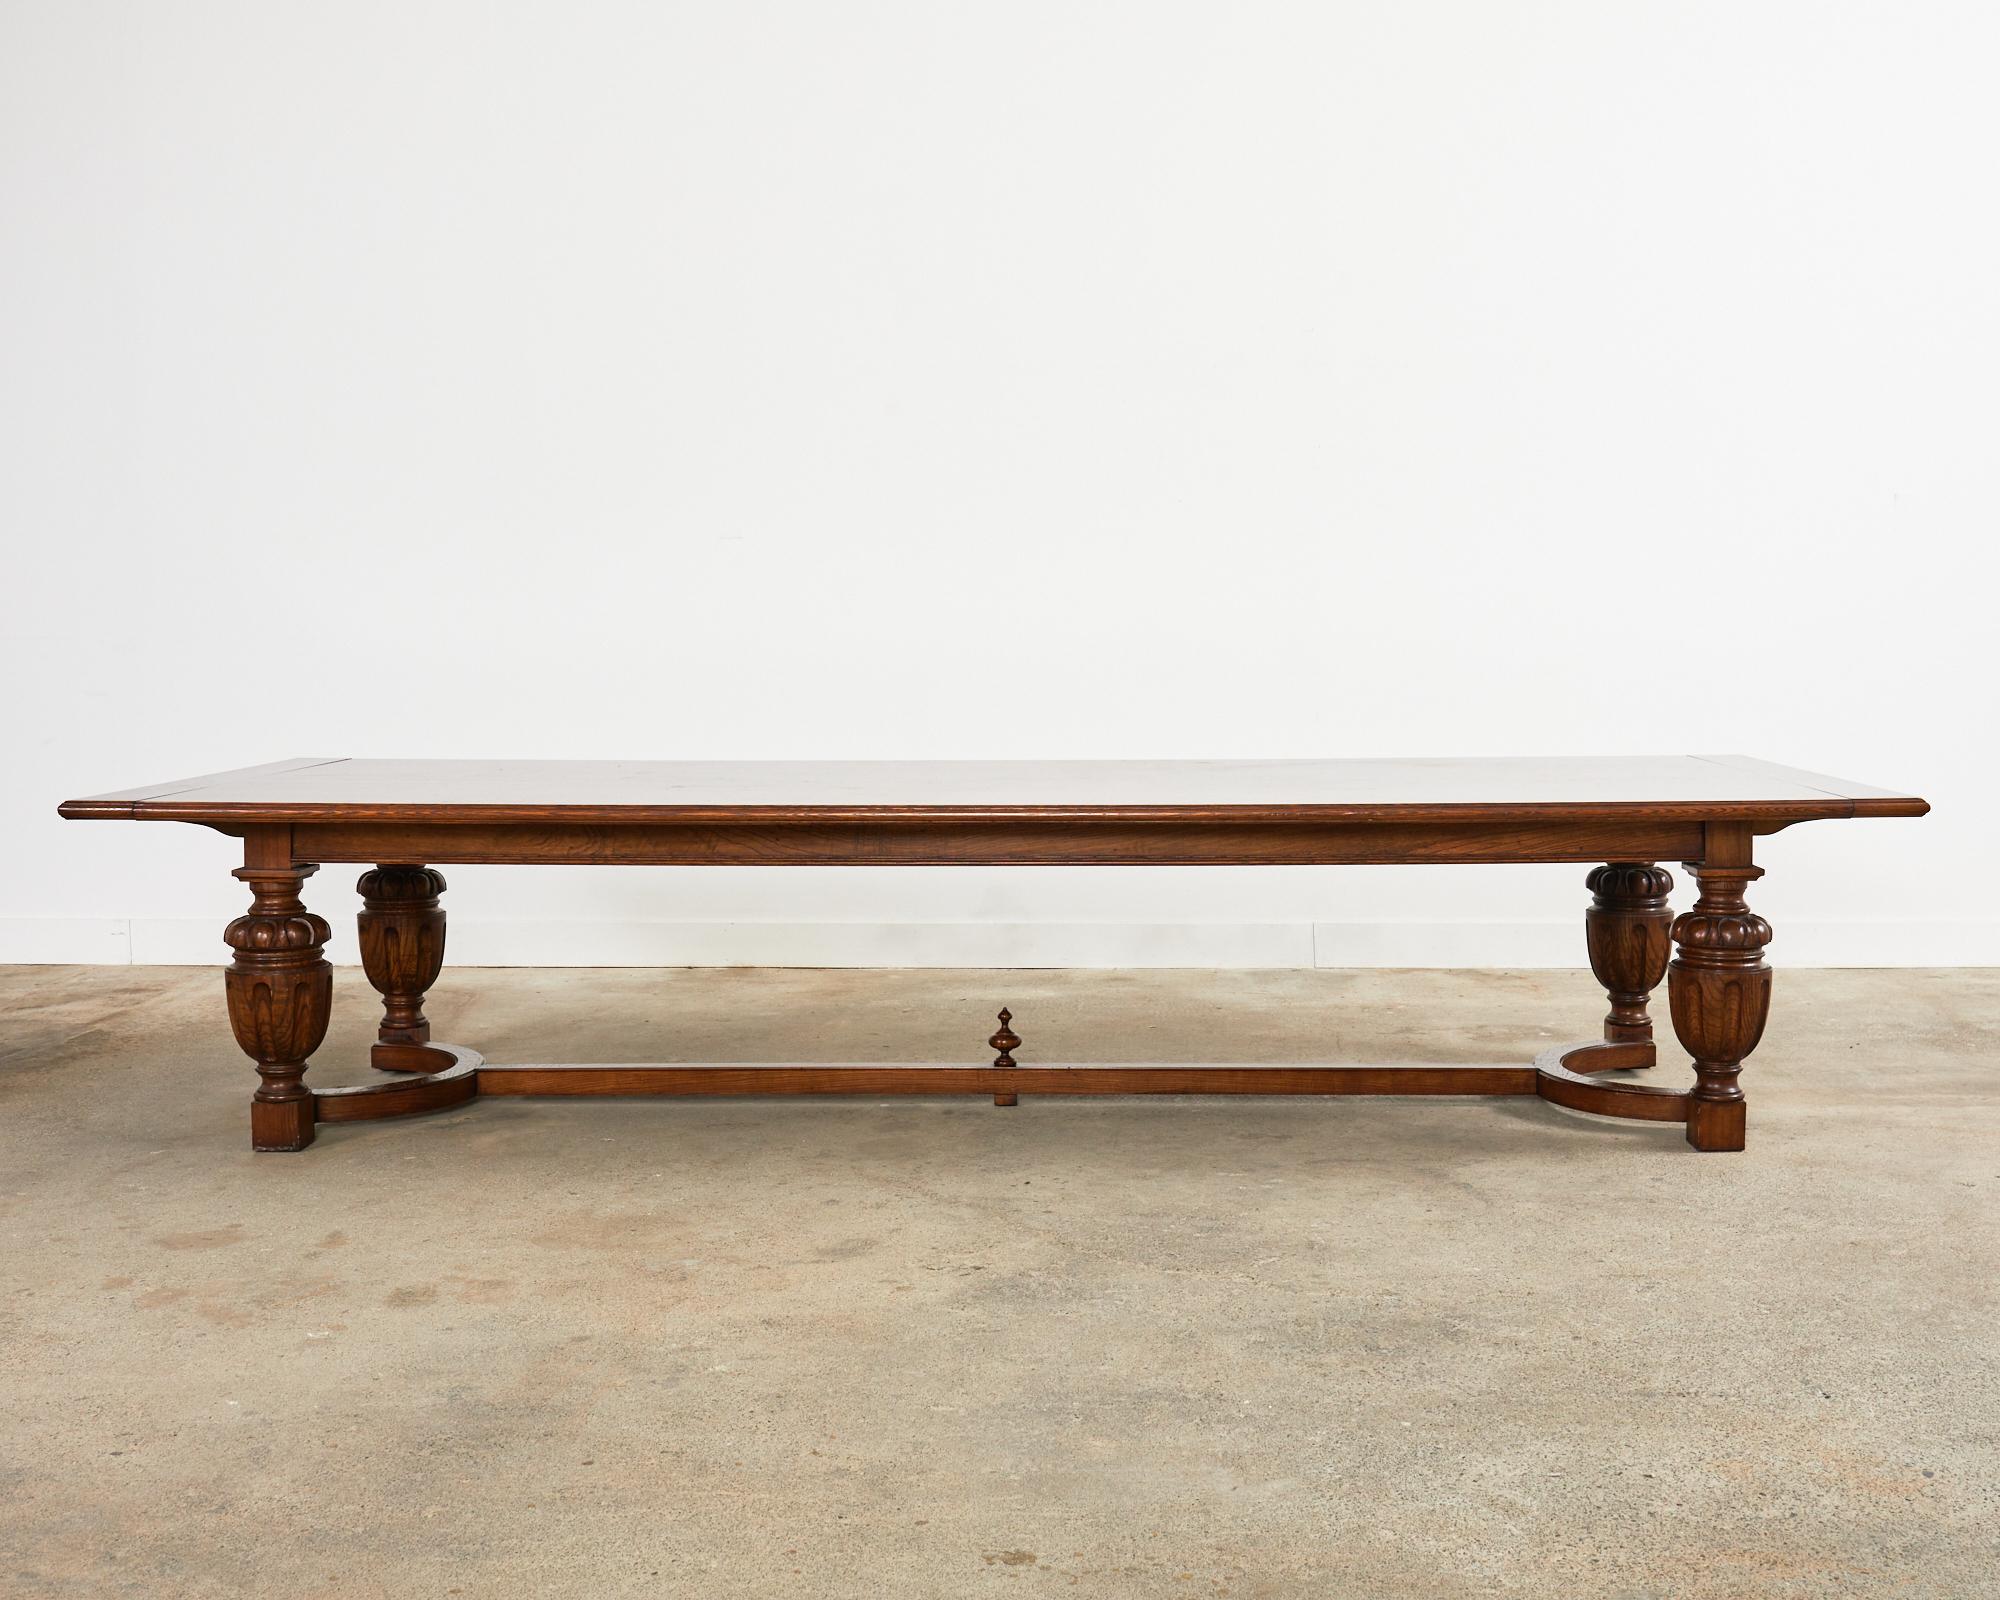 Hand-Crafted Monumental Italian Baroque Style Oak Refectory Dining Table